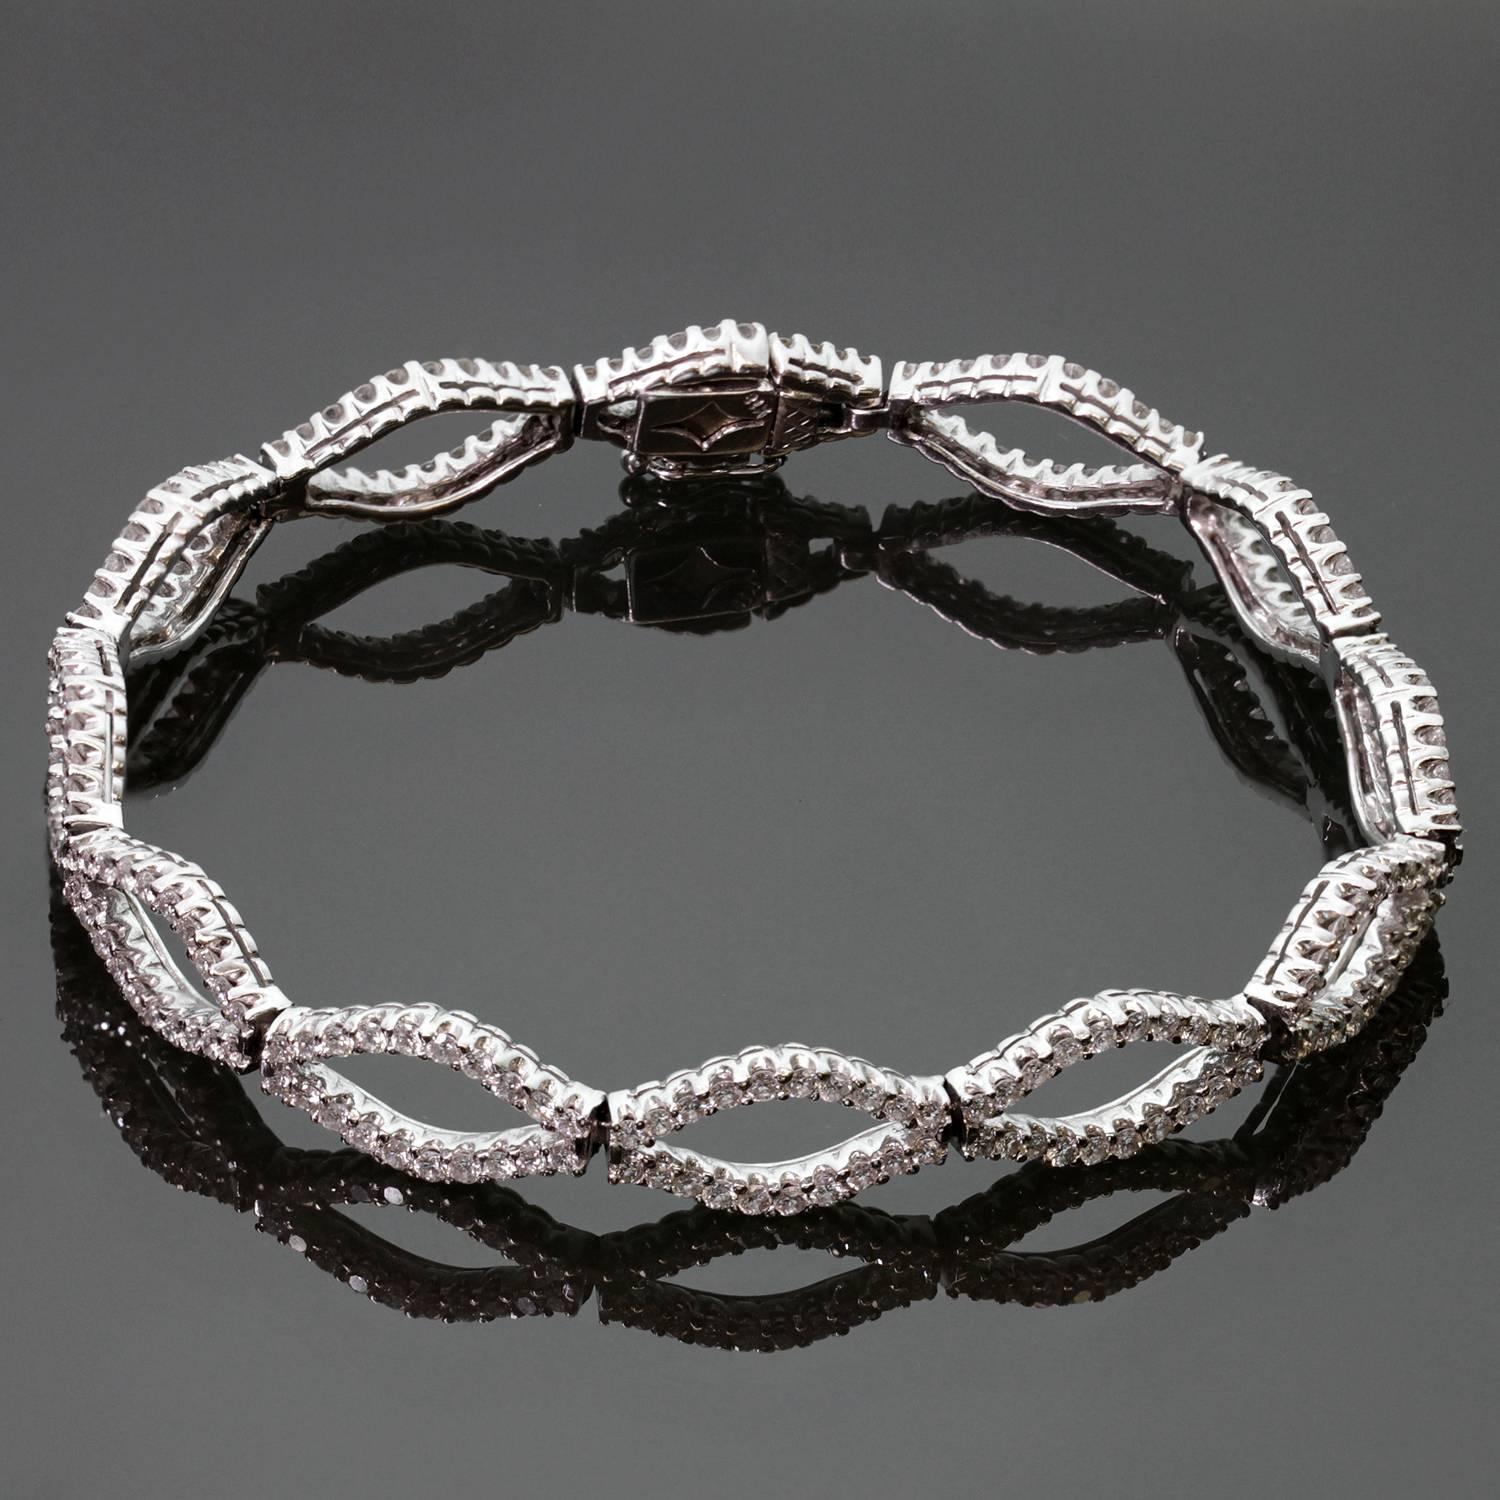 This stunning women's tennis bracelet features marquise-shaped links made in 18k white gold and set with 240 sparkling round diamonds. An elegant design. Measurements: 0.31